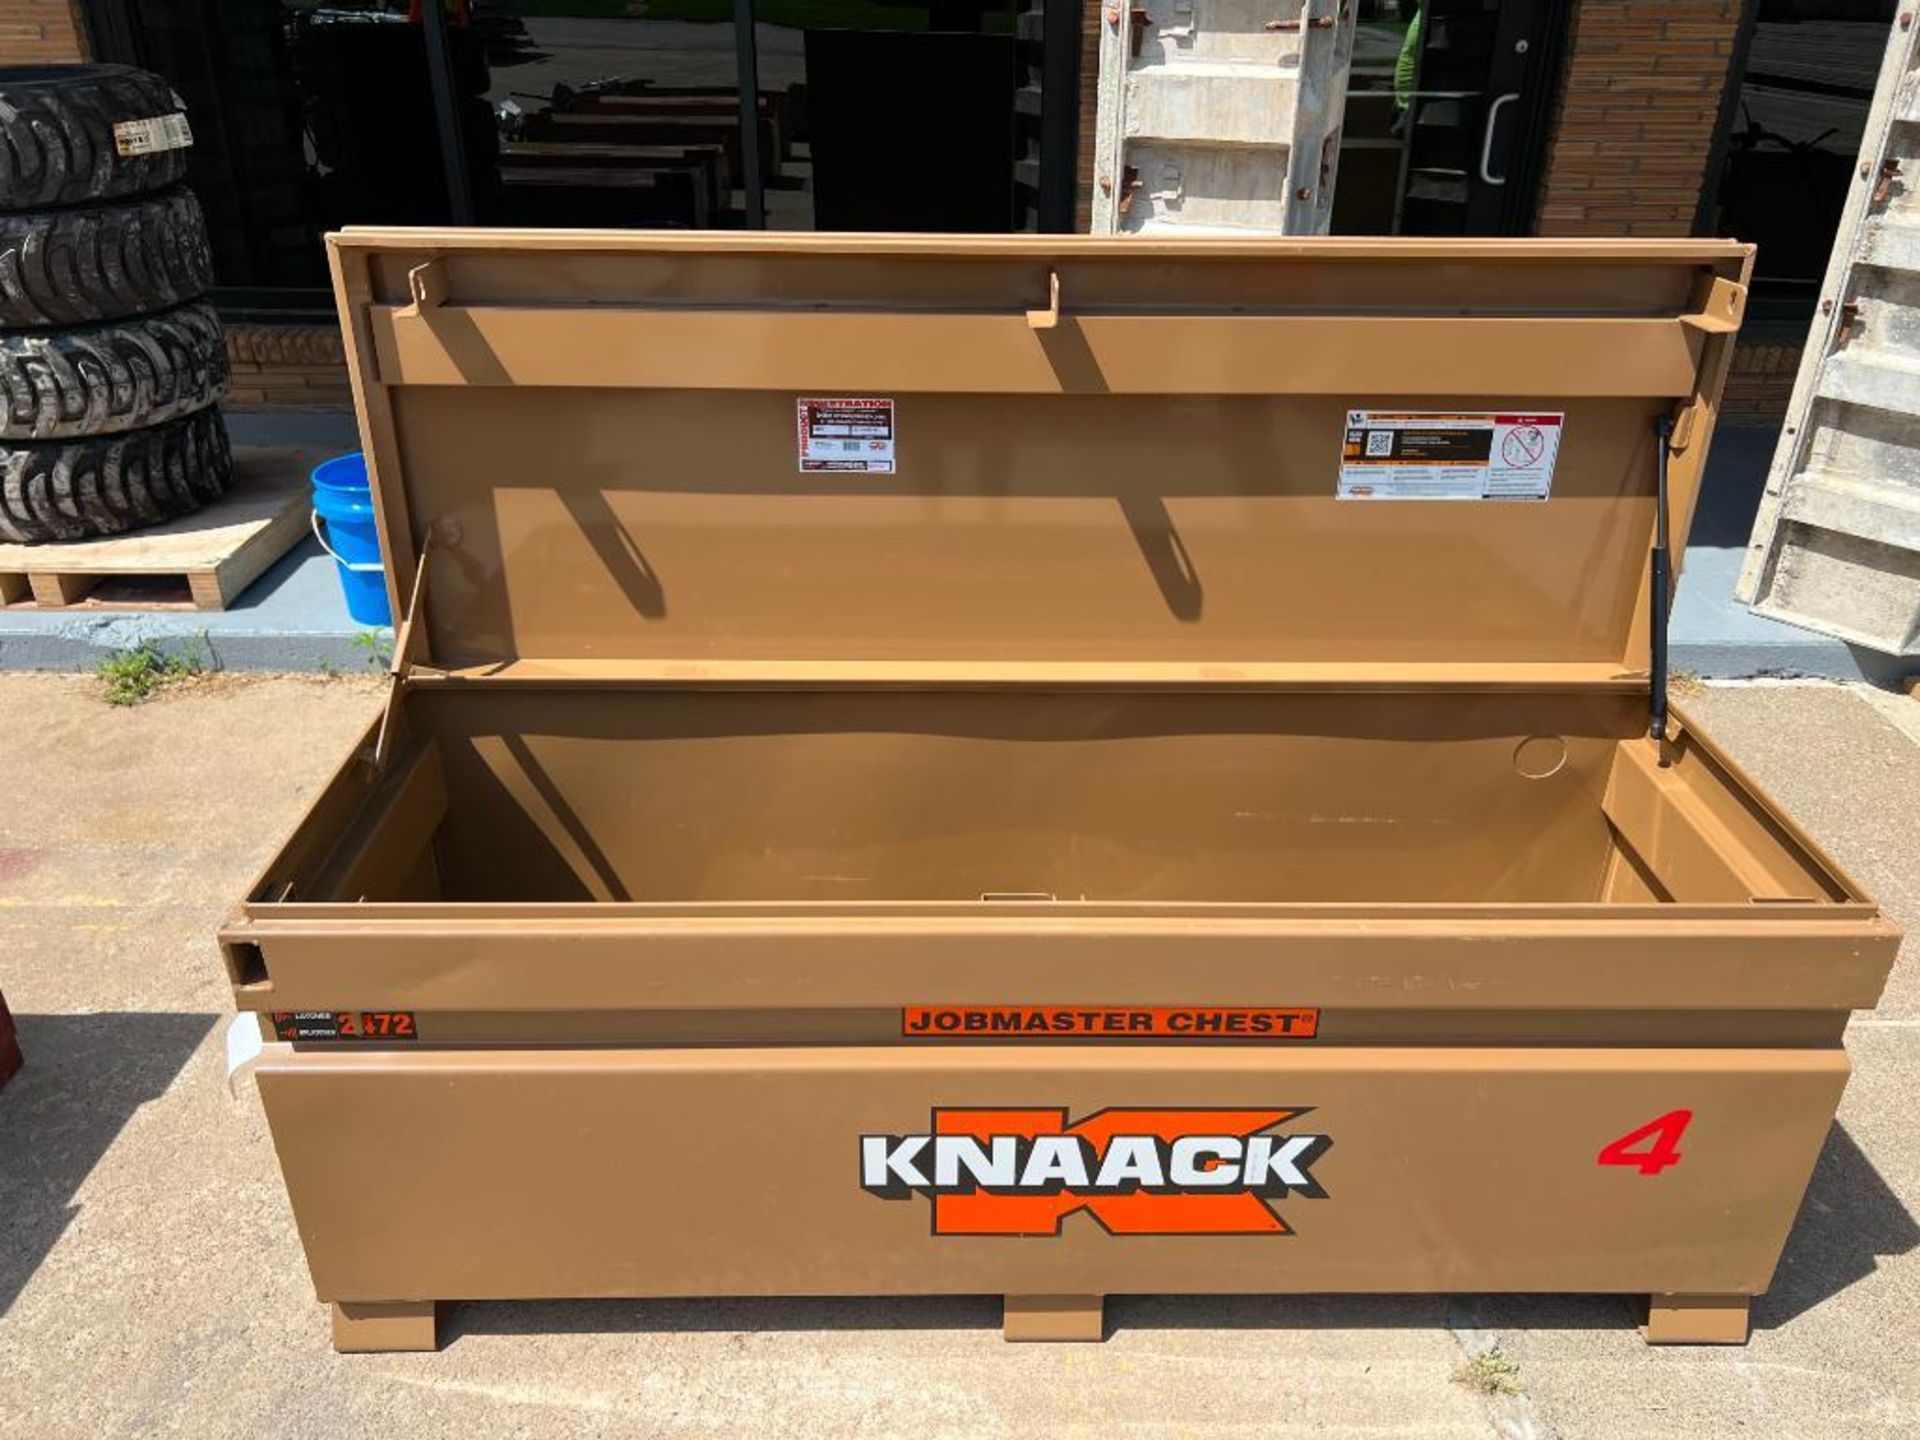 Knaack Jobmaster Chest, Model #2472, Serial #2211017597. Located in Mt. Pleasant, IA - Image 3 of 3